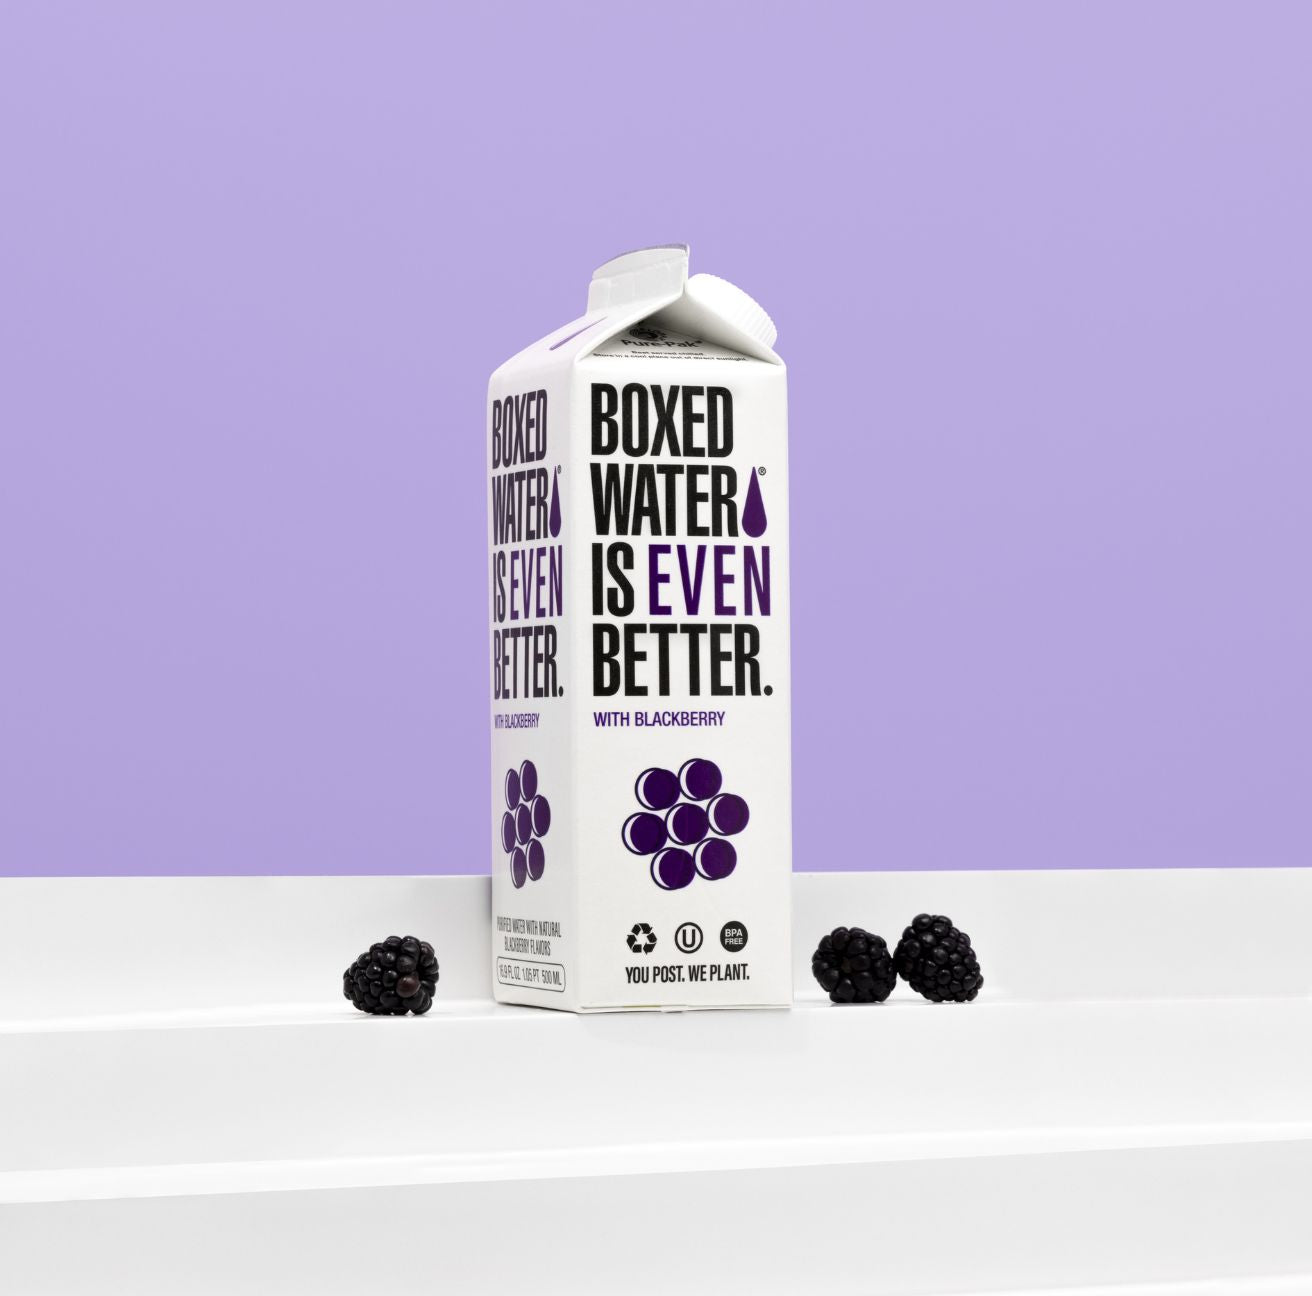 Blackberry Boxed Water in front of a purple background